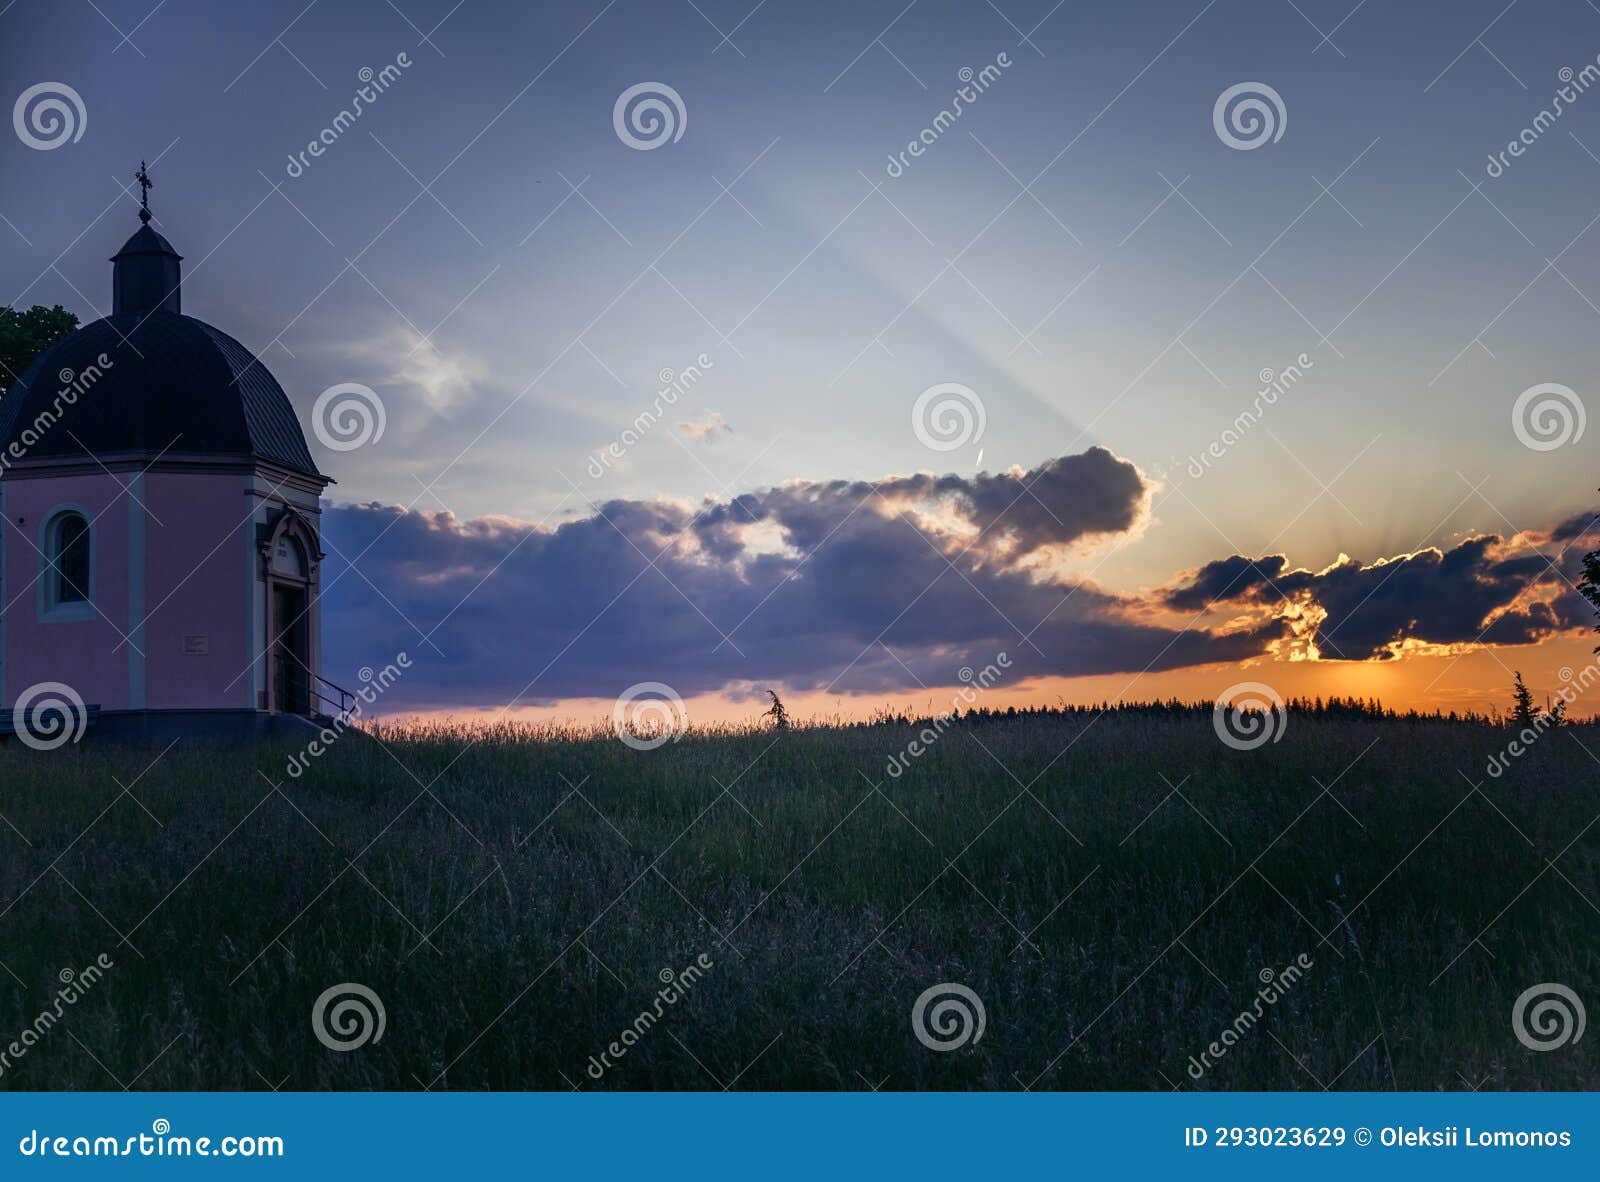 a small building in a field with a sky background and clouds in the background with sun rays coming through